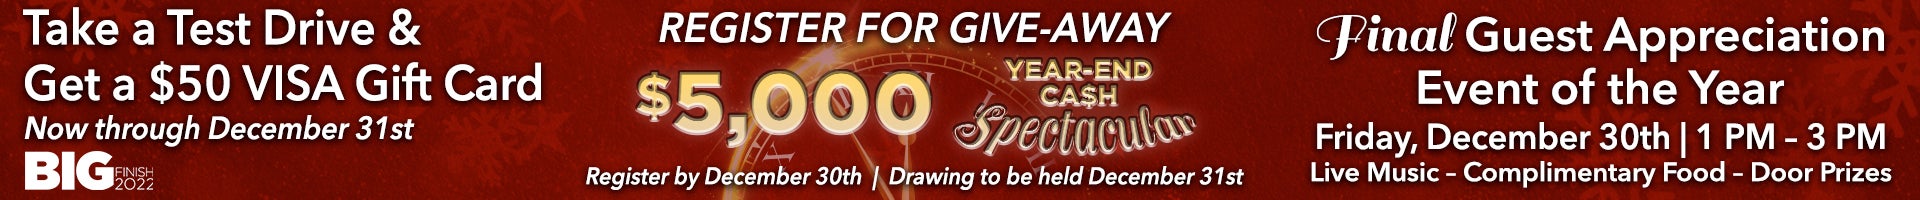 $5,000 Year-end Cash Spectular at the Final Guest Appreciation Event | Big Finish 2022